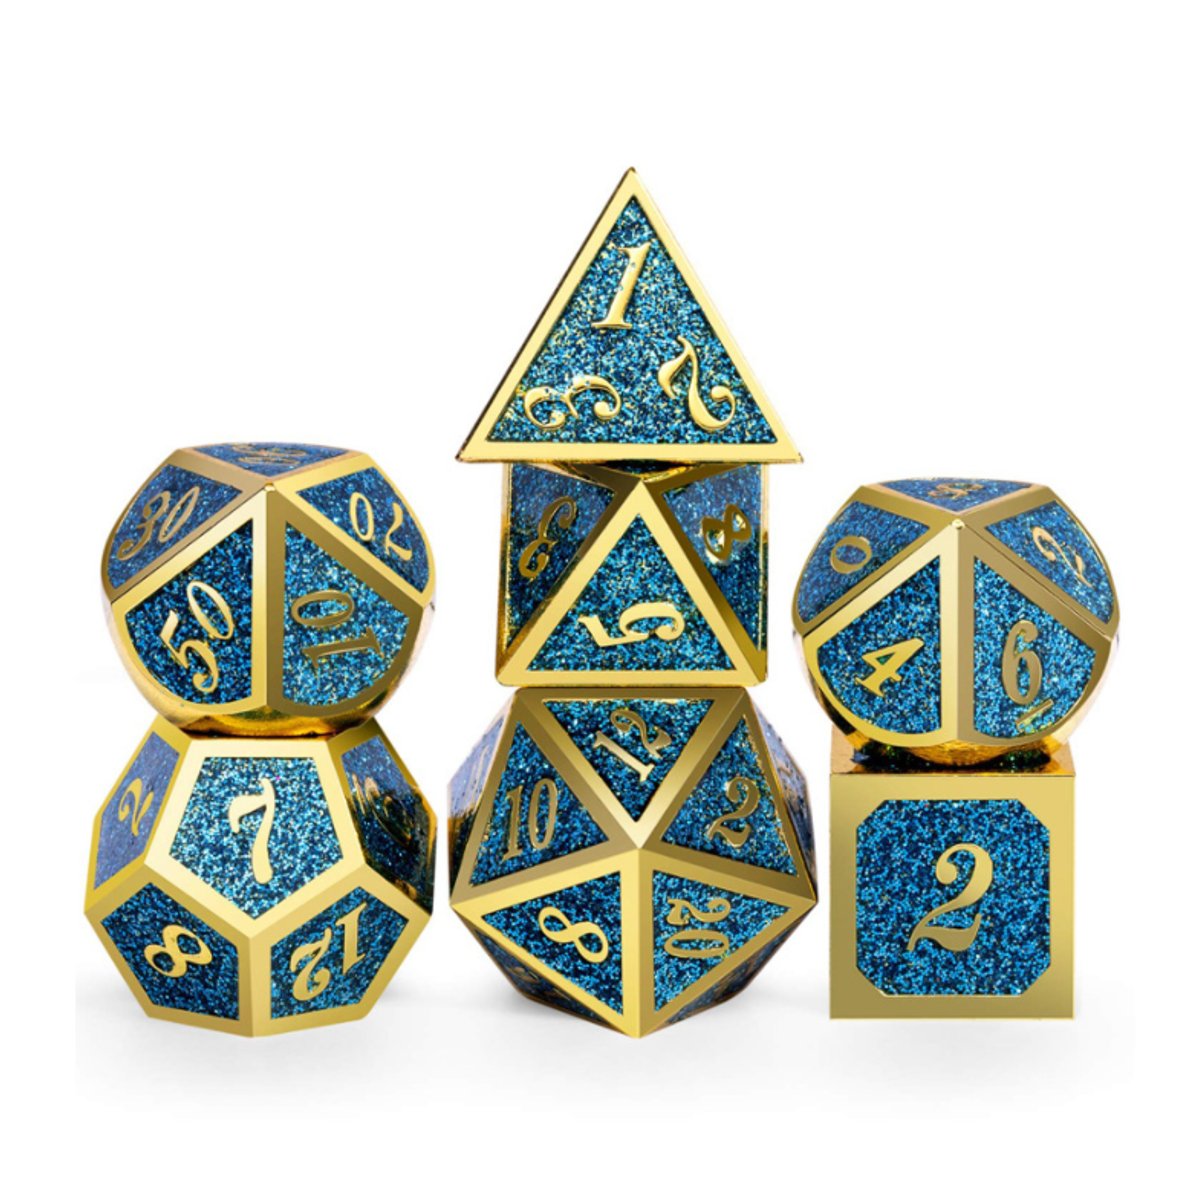 7pcs-Polyhedral-Dice-Zinc-Alloy-Dice-Set-Heavy-Duty-Dices-For-Role-Playing-Game-Dice-Set-1590750-2